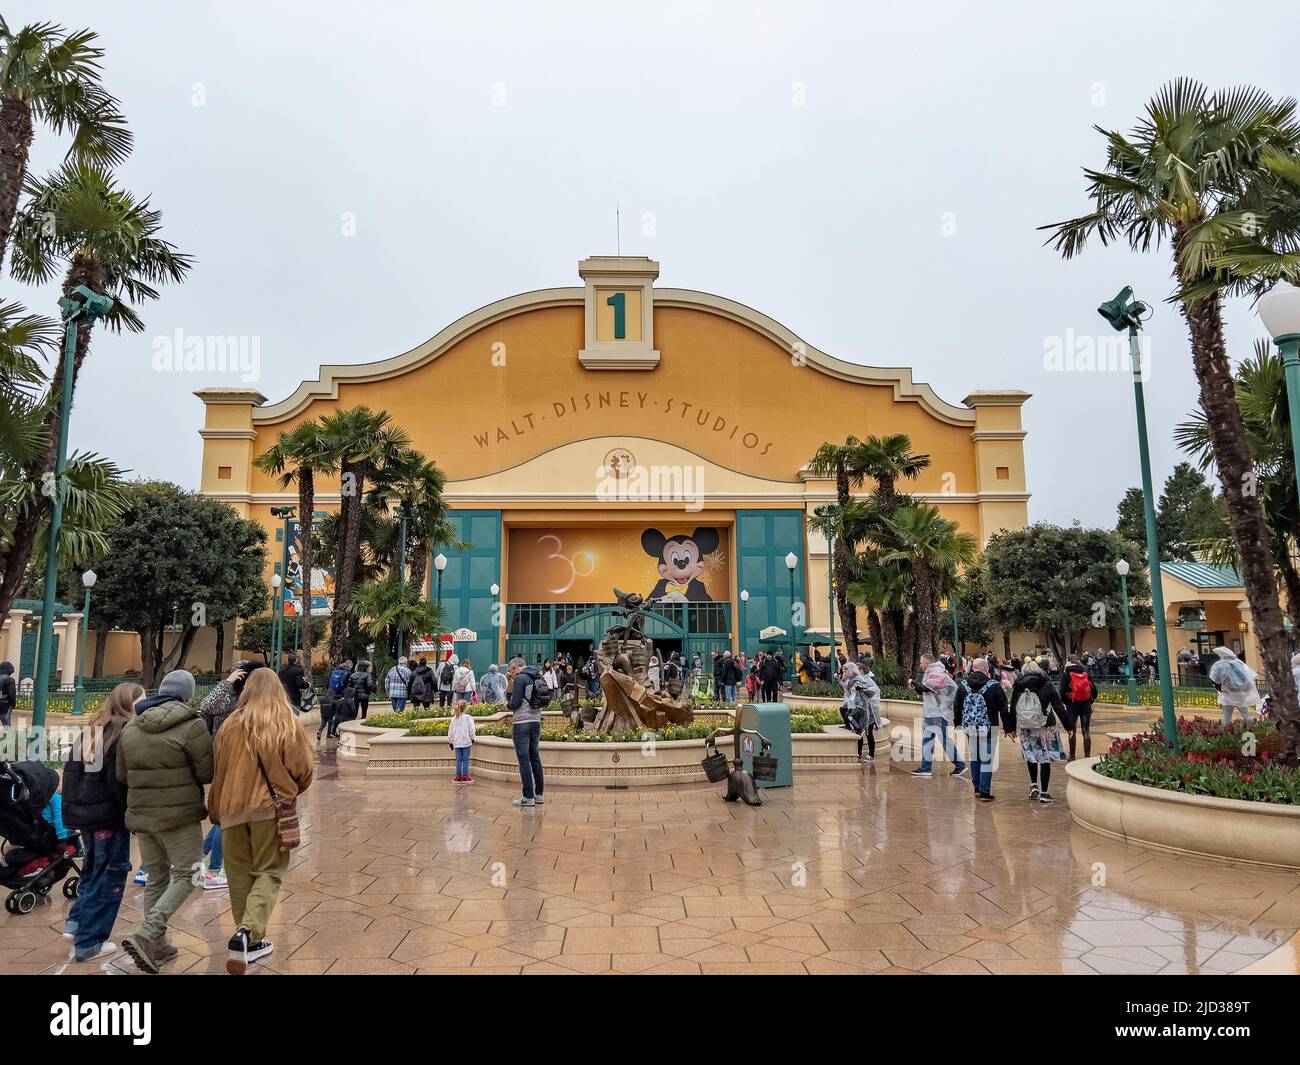 Paris, France - 04/05/2022: Water tower and entrance archway to Walt Disney Studios in Disneyland Paris. Cloudy weather. People walking to the gate. Stock Photo